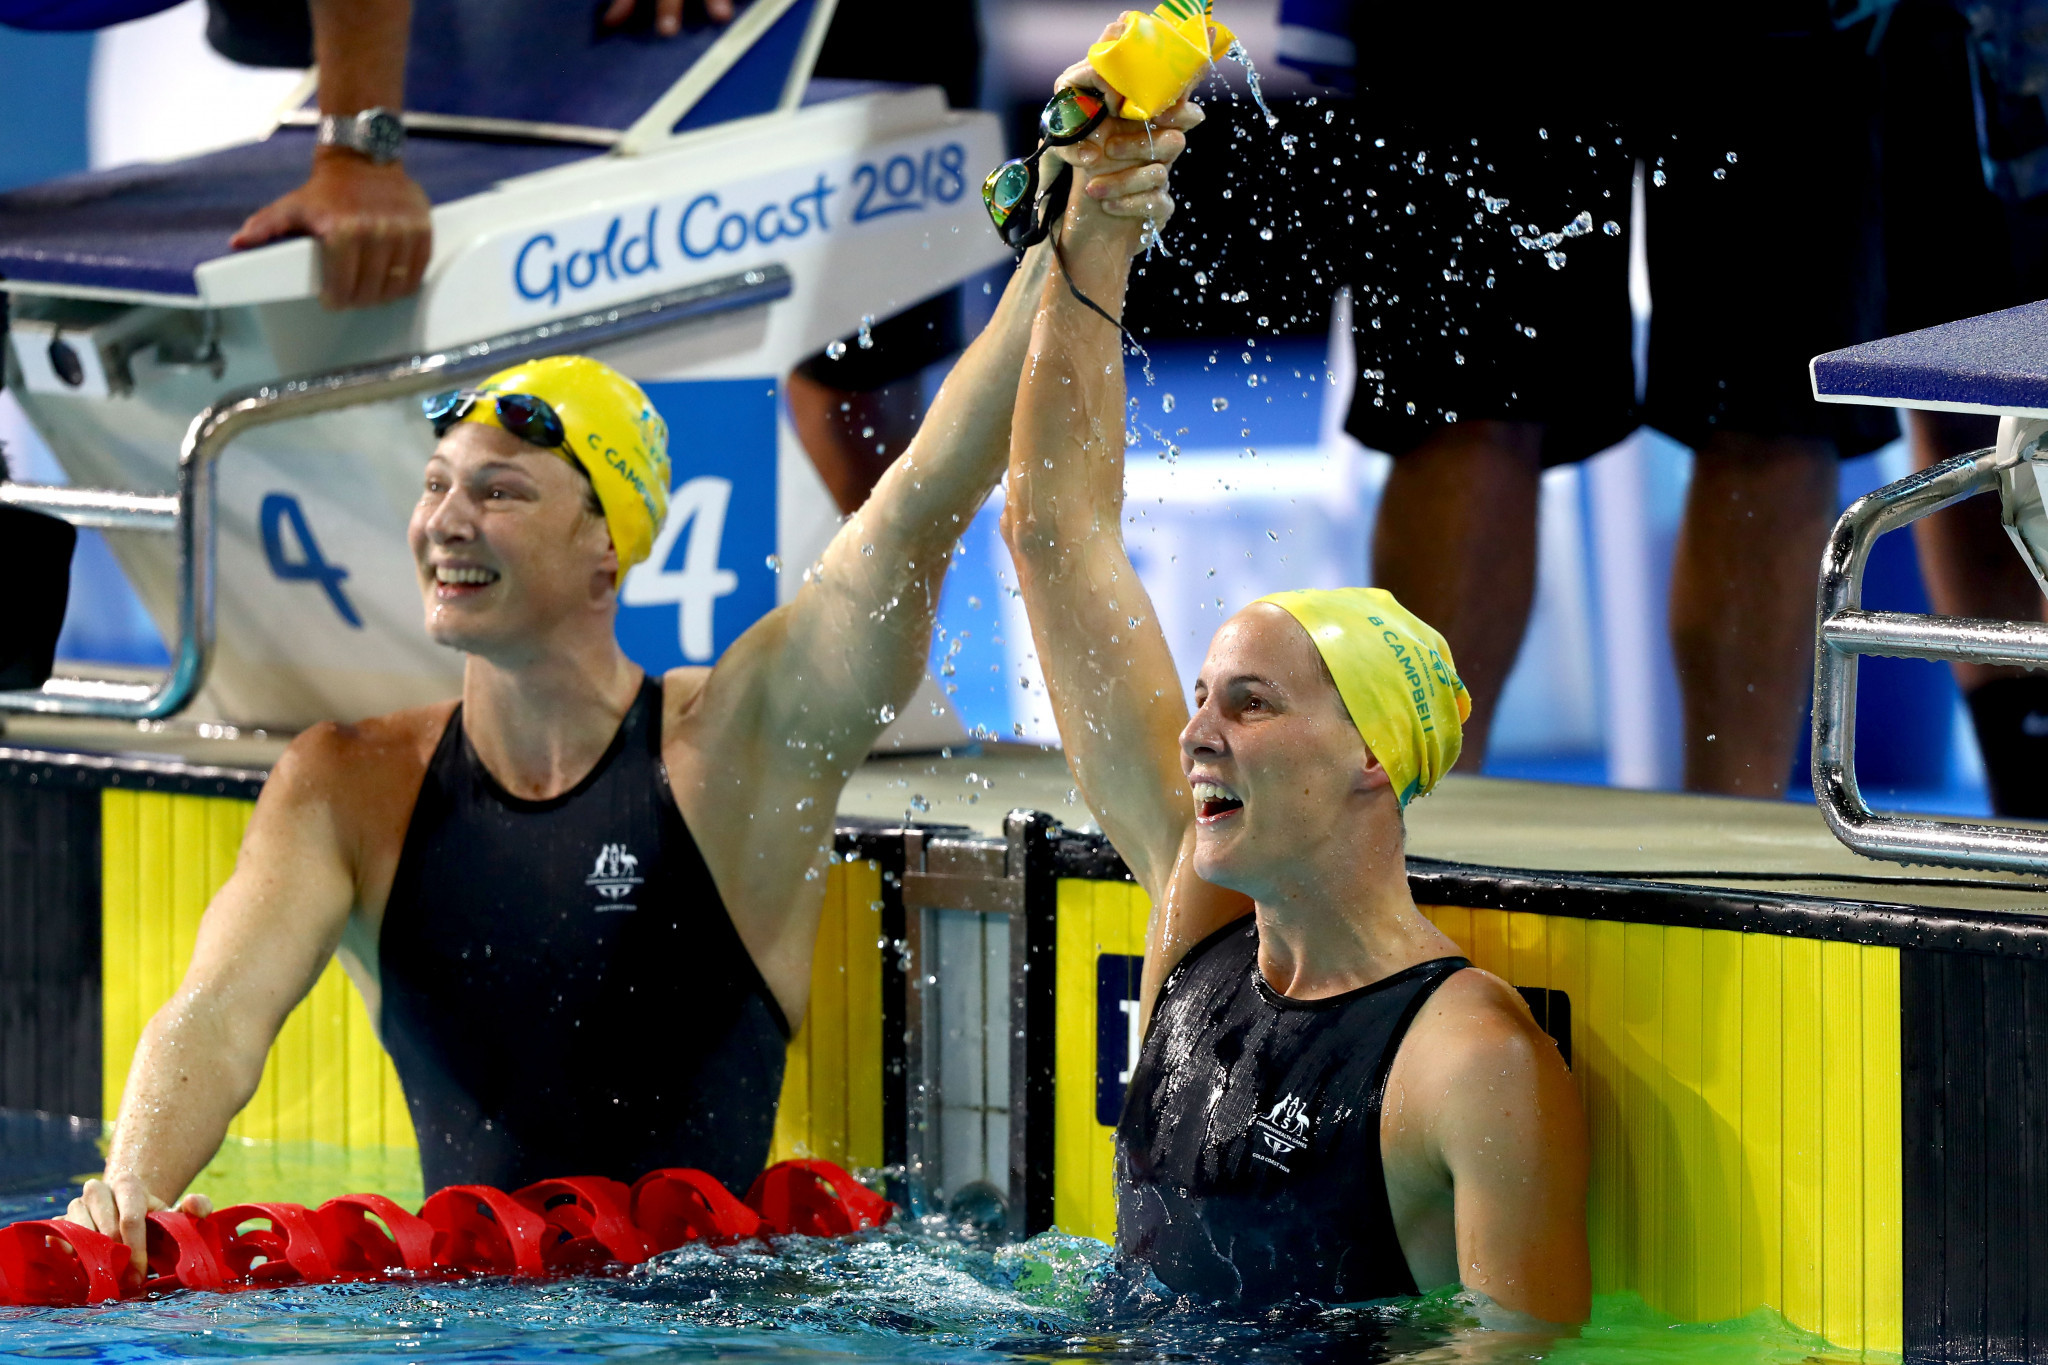 Australia won six more gold medals at Gold Coast 2018 than every other country and territory combined ©Getty Images